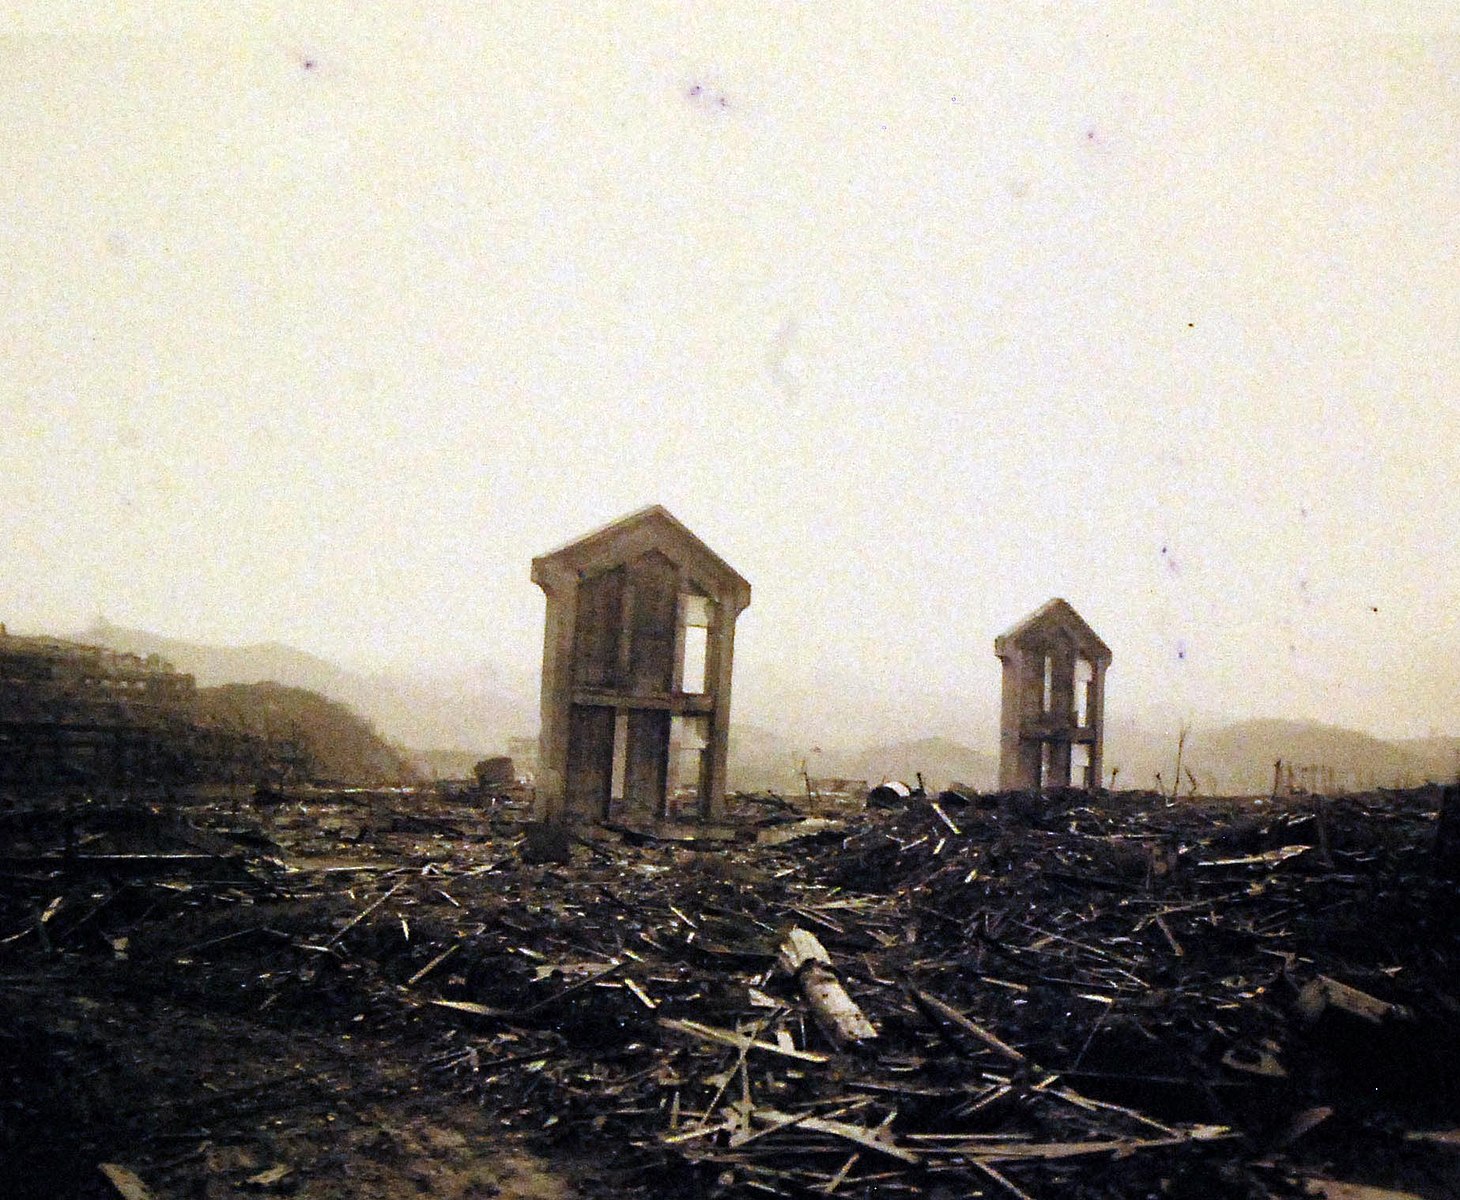 Atomic Bomb-Nagasaki, 1945. Two lonely, upright sentinels in the ocean of rubble, where the atomic bomb exploded. They may have been part of a school, warehouse or industrial plant. Photographed by September 16, 1945. Official U.S. Marine Corps Photograph, now in the collections of the National Archives. (2016/10/25). Image courtesy Wikimedia Commons.